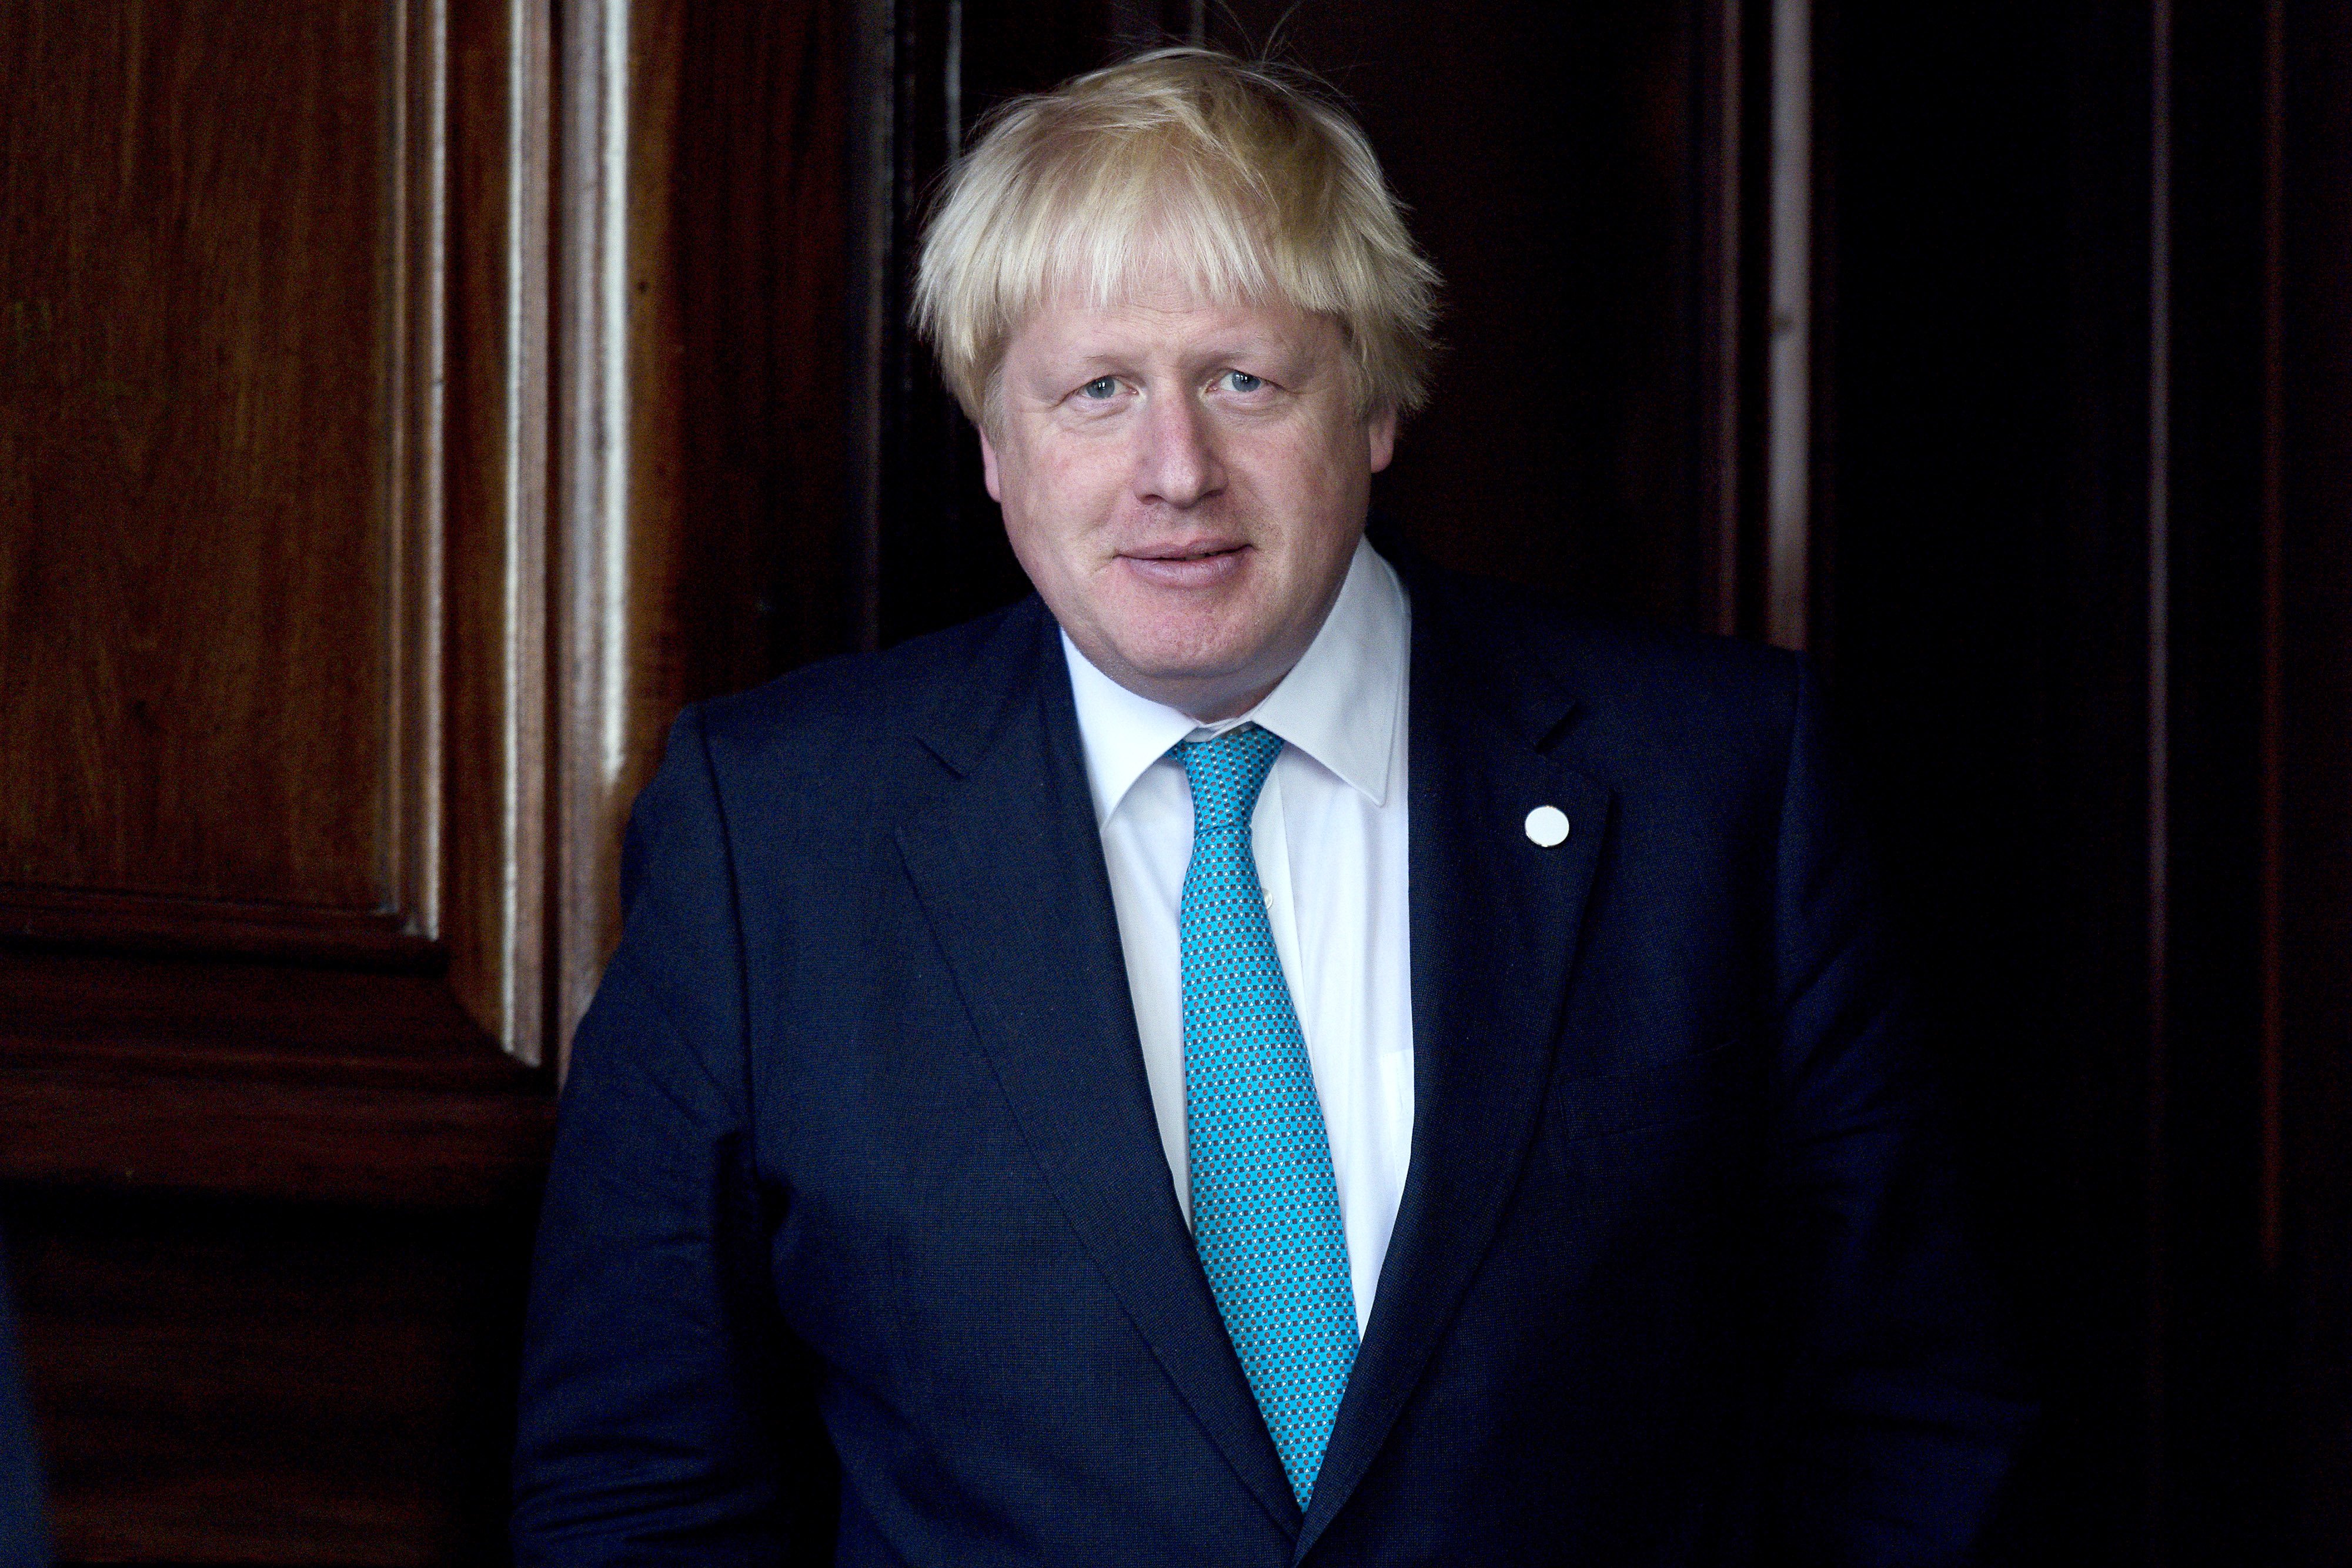 British Foreign Secretary Boris Johnson at Lancaster House on October 16, 2016, in London, England. Source: Getty Images.